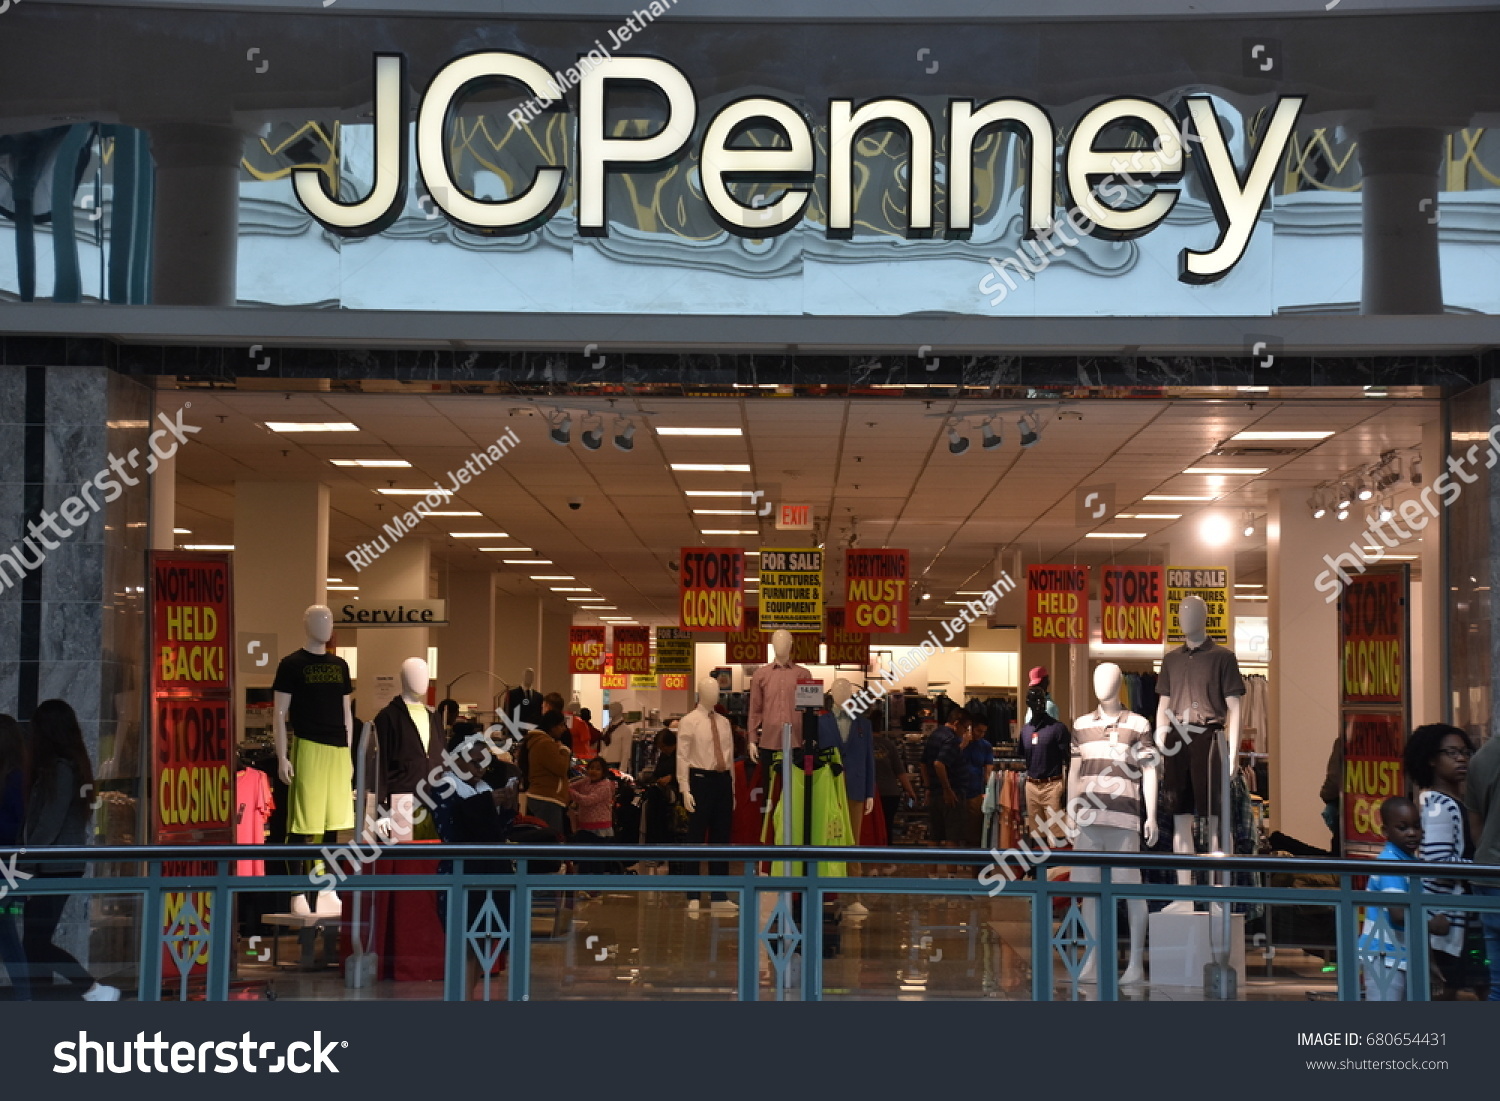 King Prussia Pa May 6 Jcpenney Stock Photo Edit Now 680654431